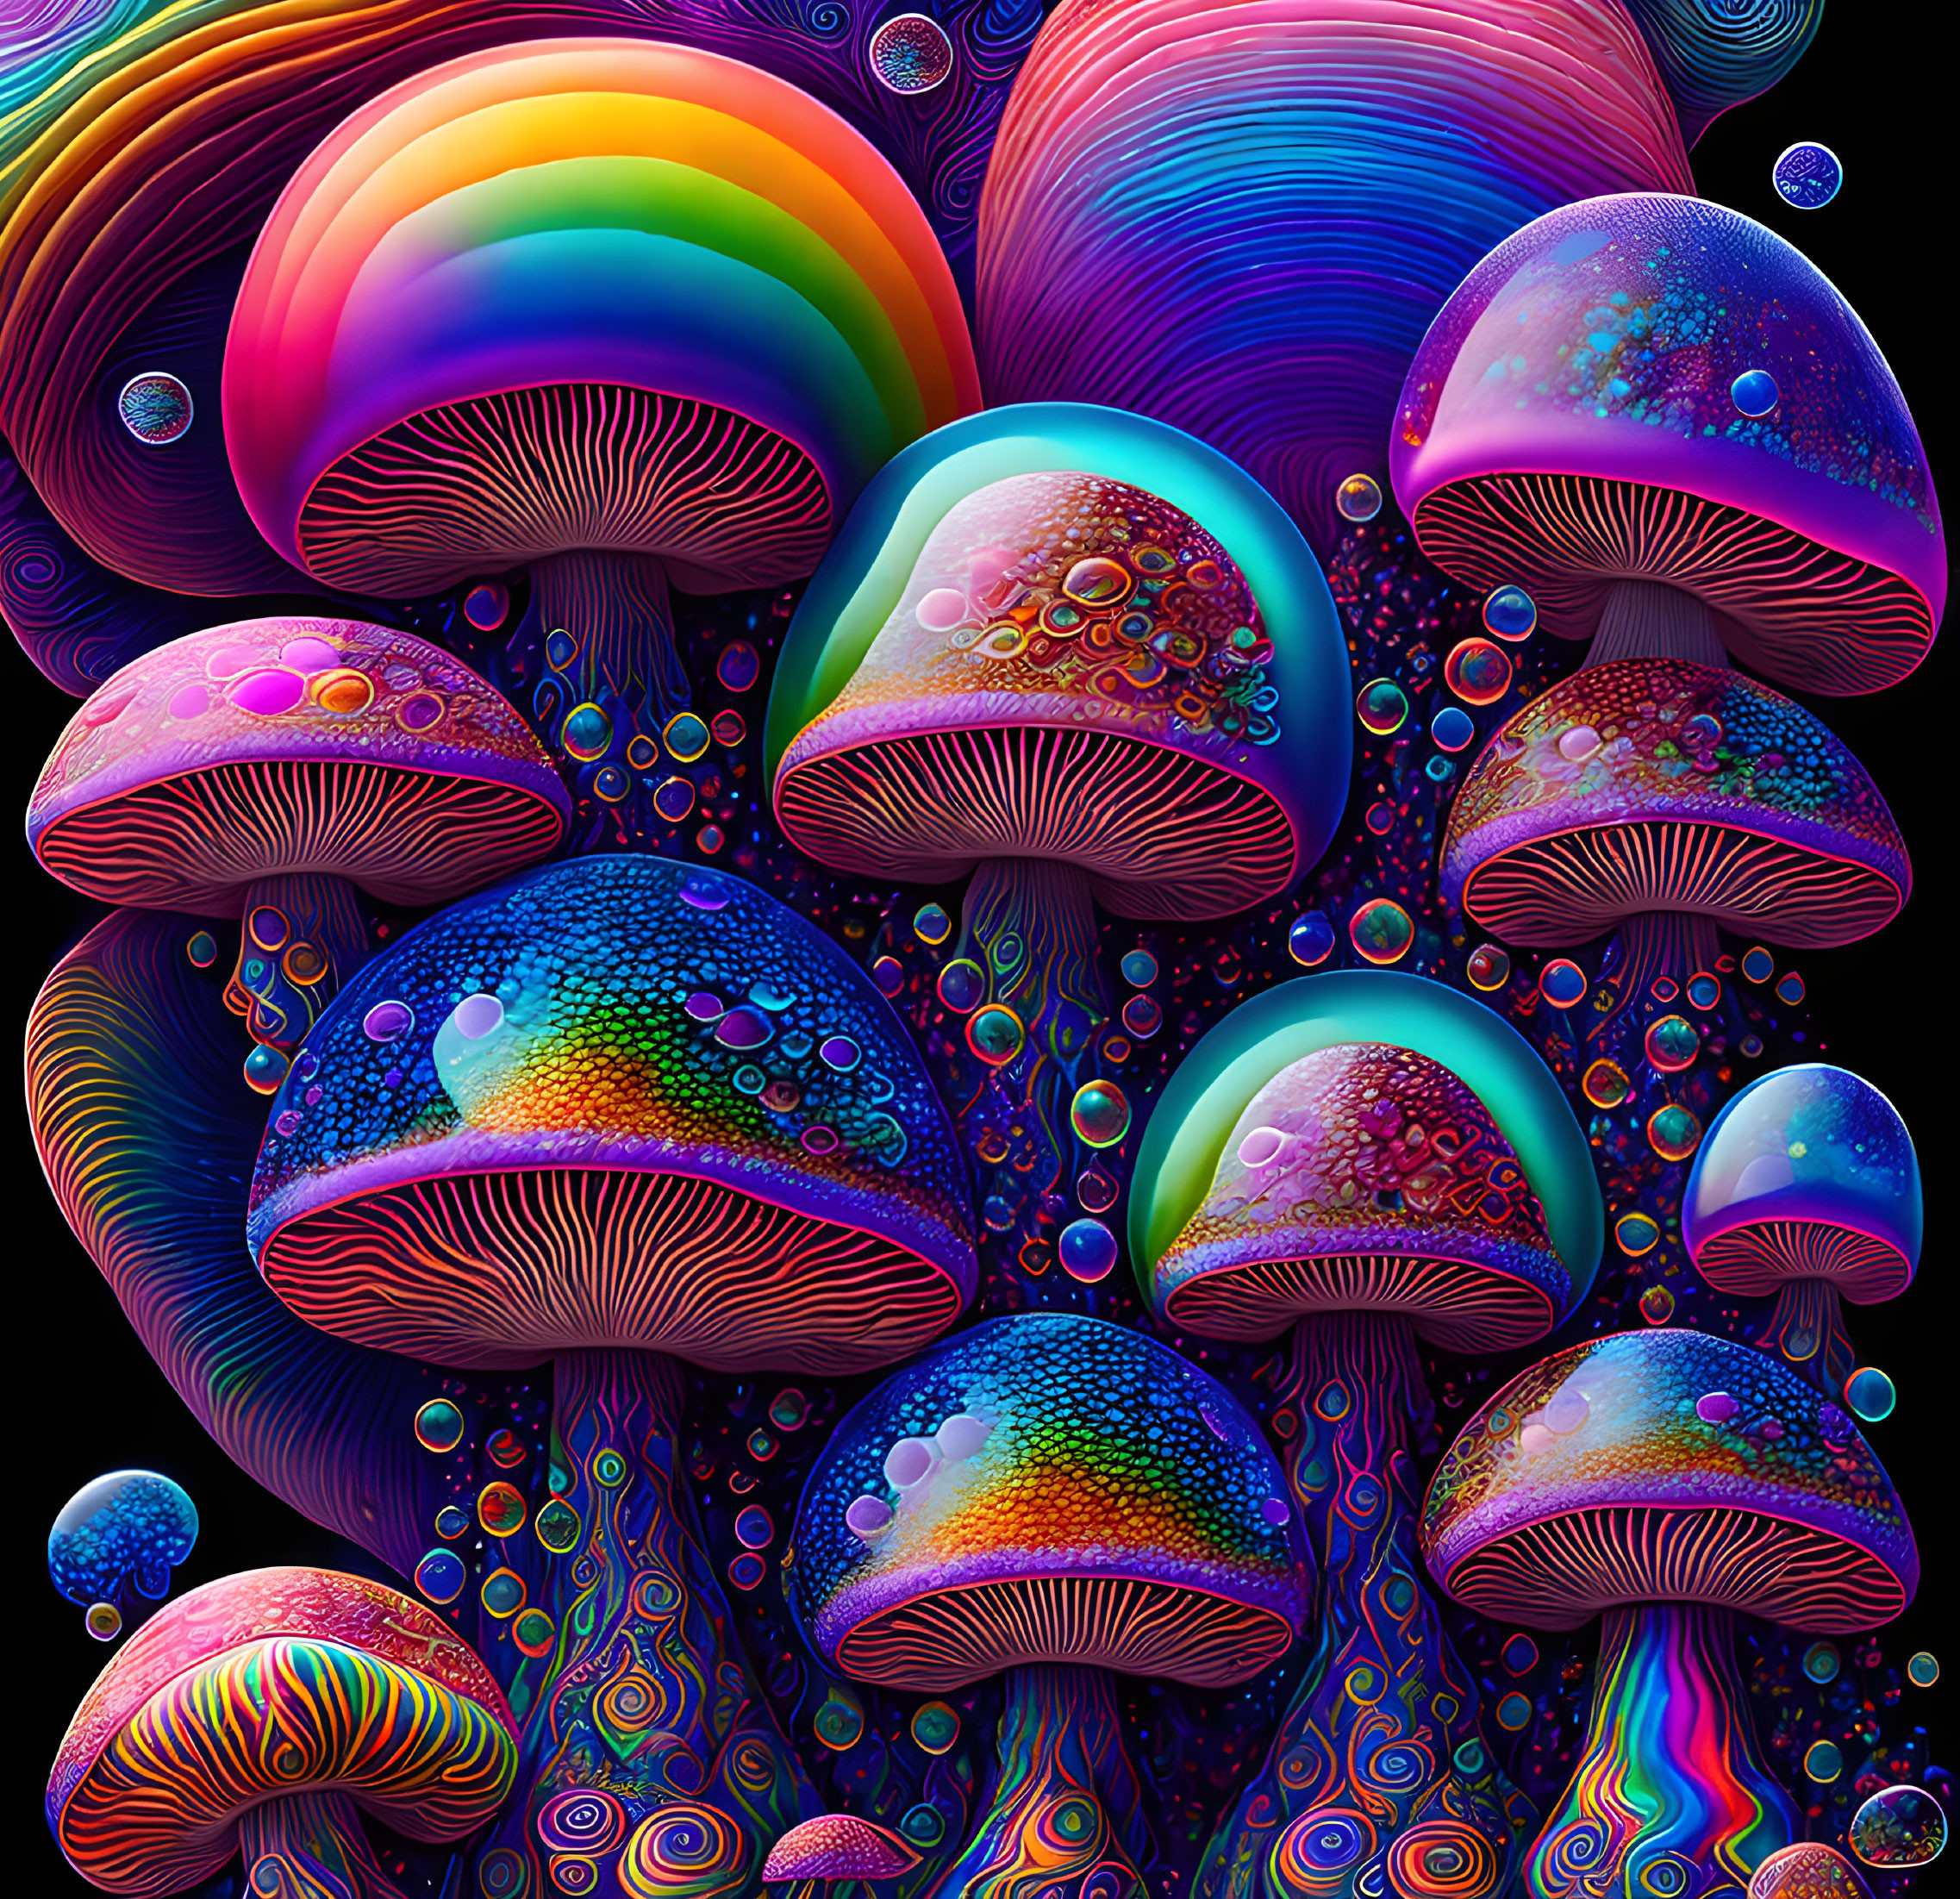 Magic Mushrooms on another planet 2